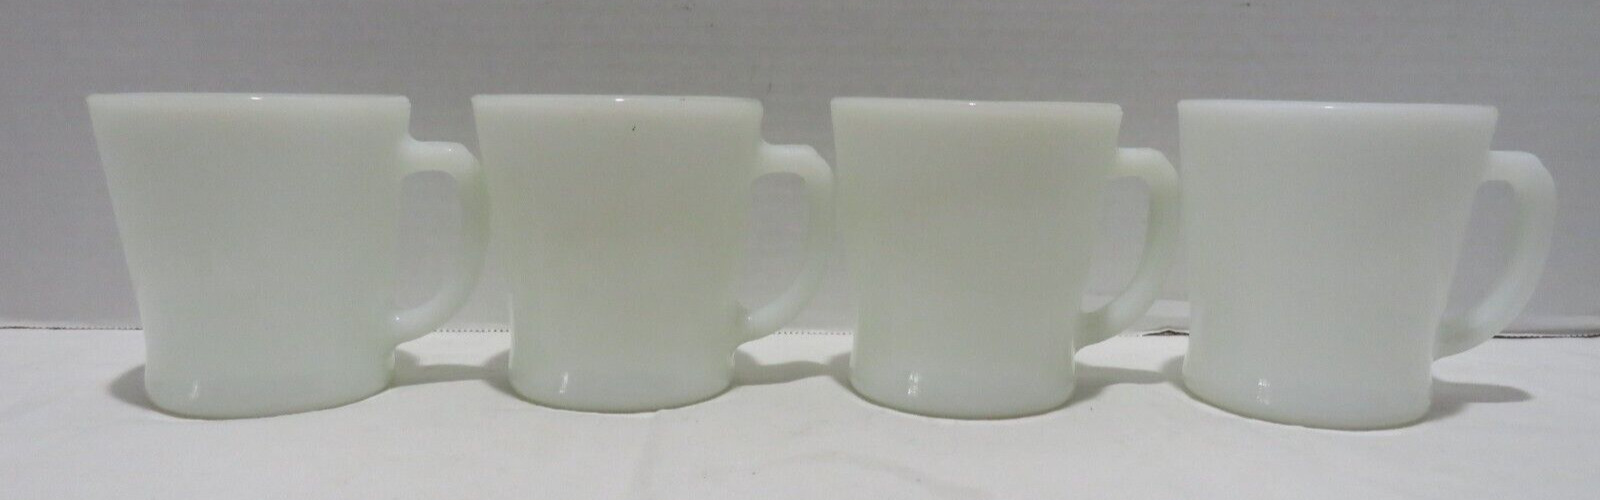 VTG WHITE ANCHOR HOCKING/FIRE KING COFFEE CUPS SET OF 4